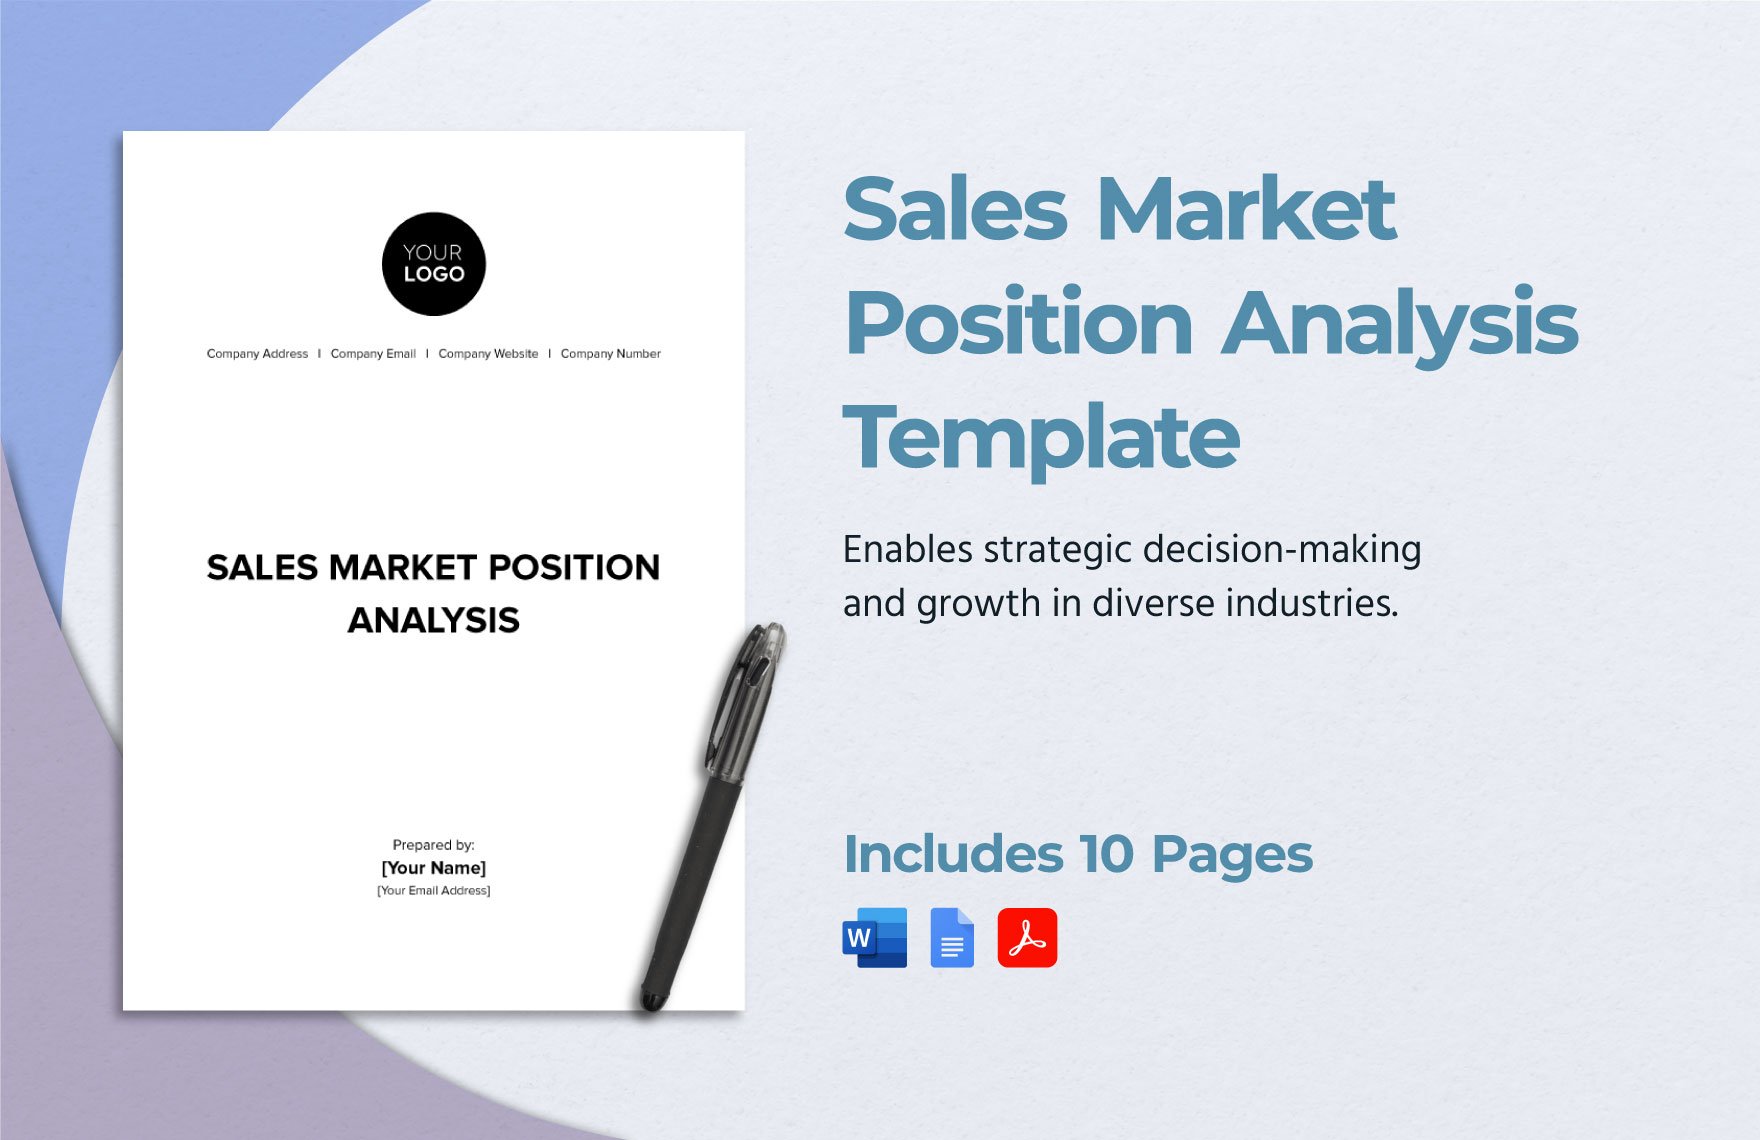 Sales Market Position Analysis Template in Word, Google Docs, PDF